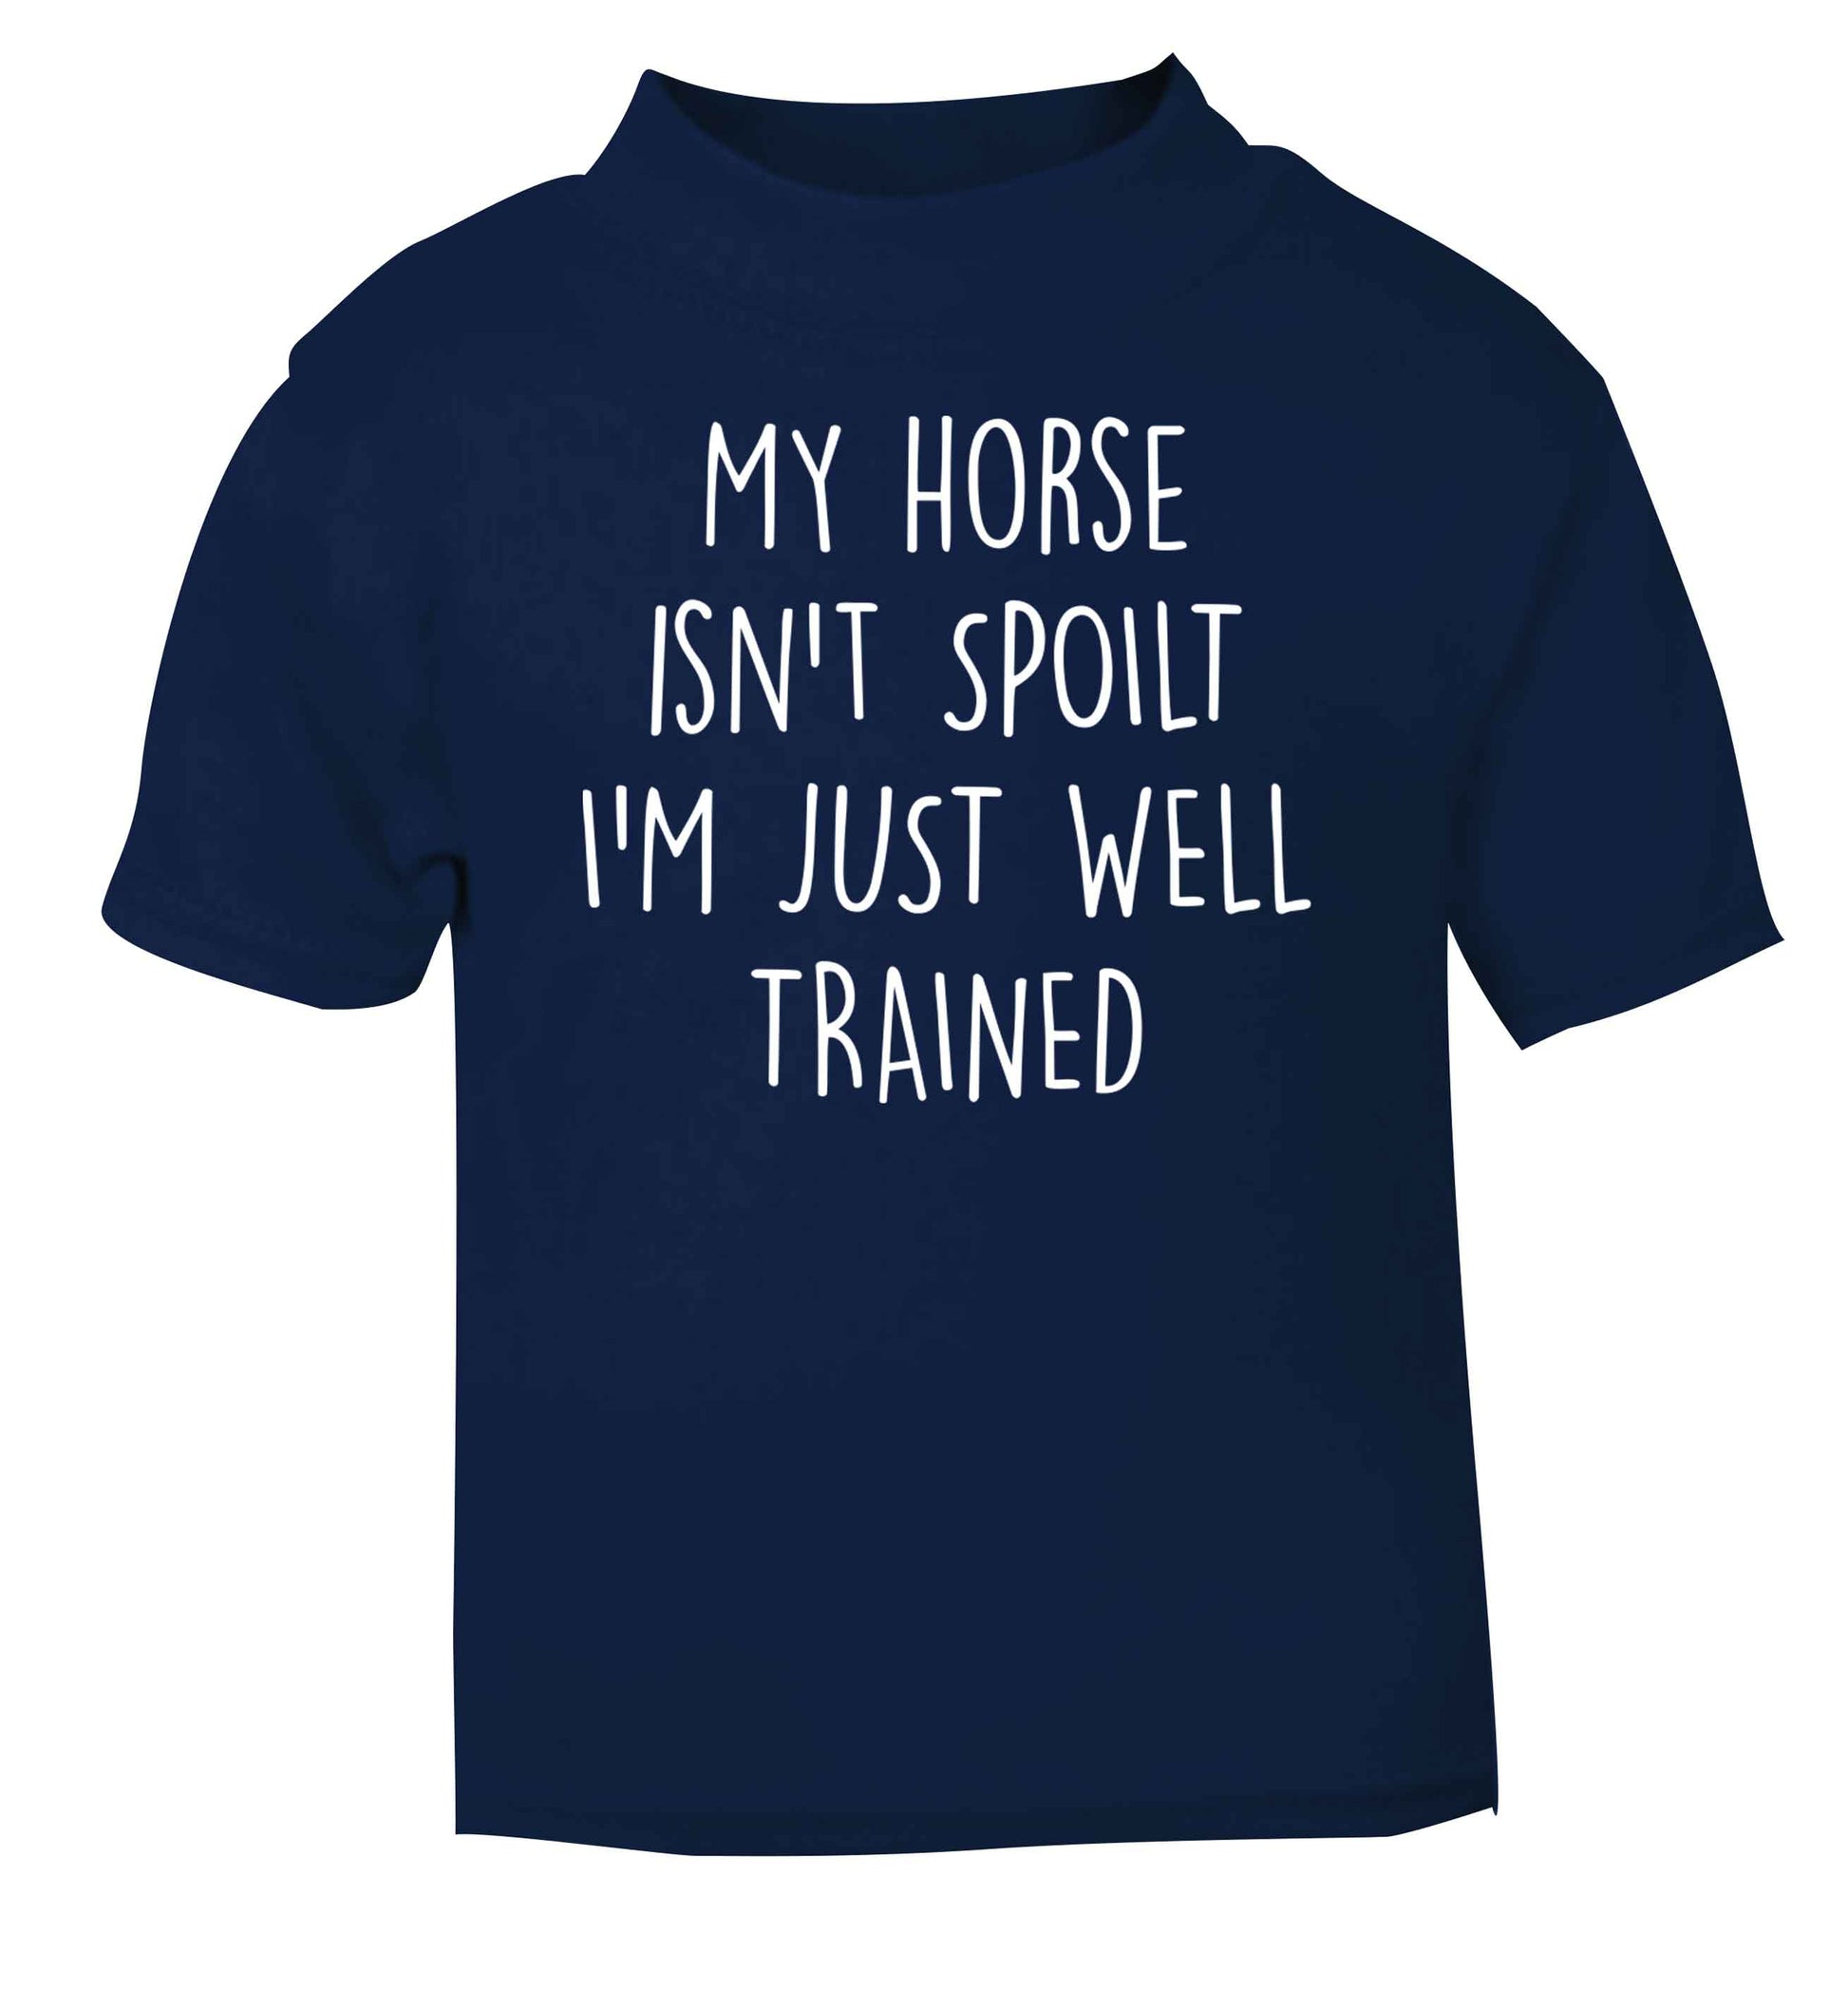 My horse isn't spoilt I'm just well trained navy baby toddler Tshirt 2 Years